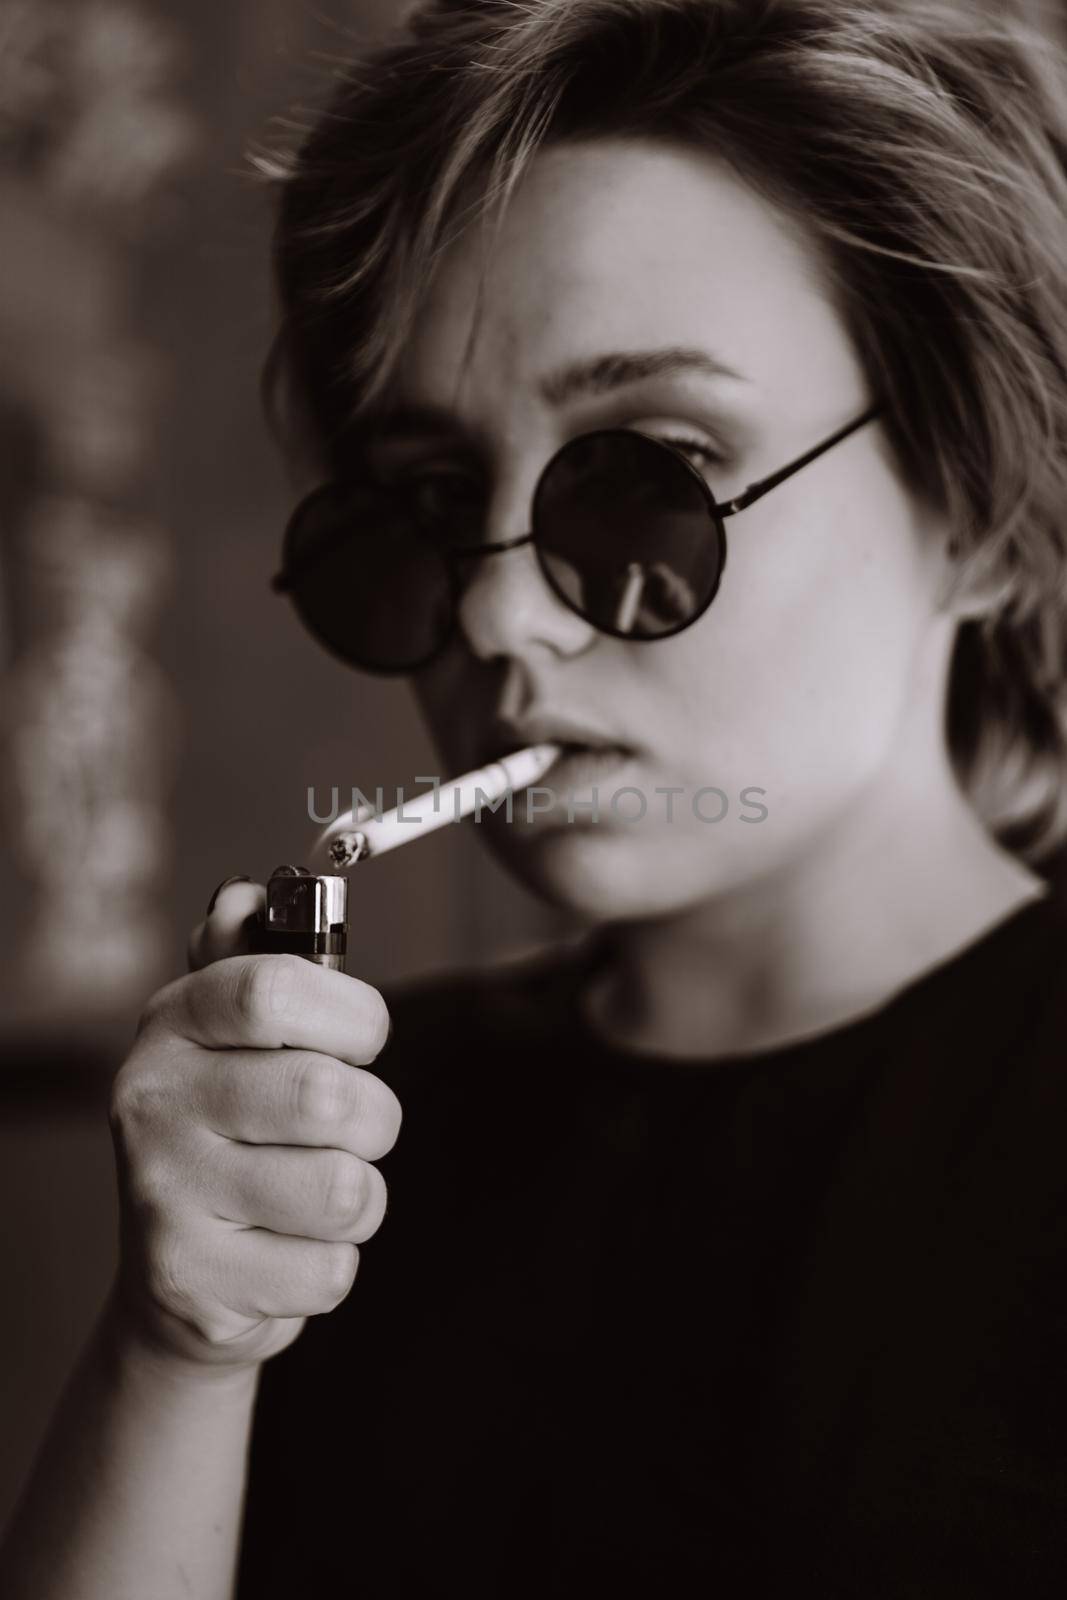 Millennial girl with short hair and mirror sunglasses smoking cigarette by natali_brill